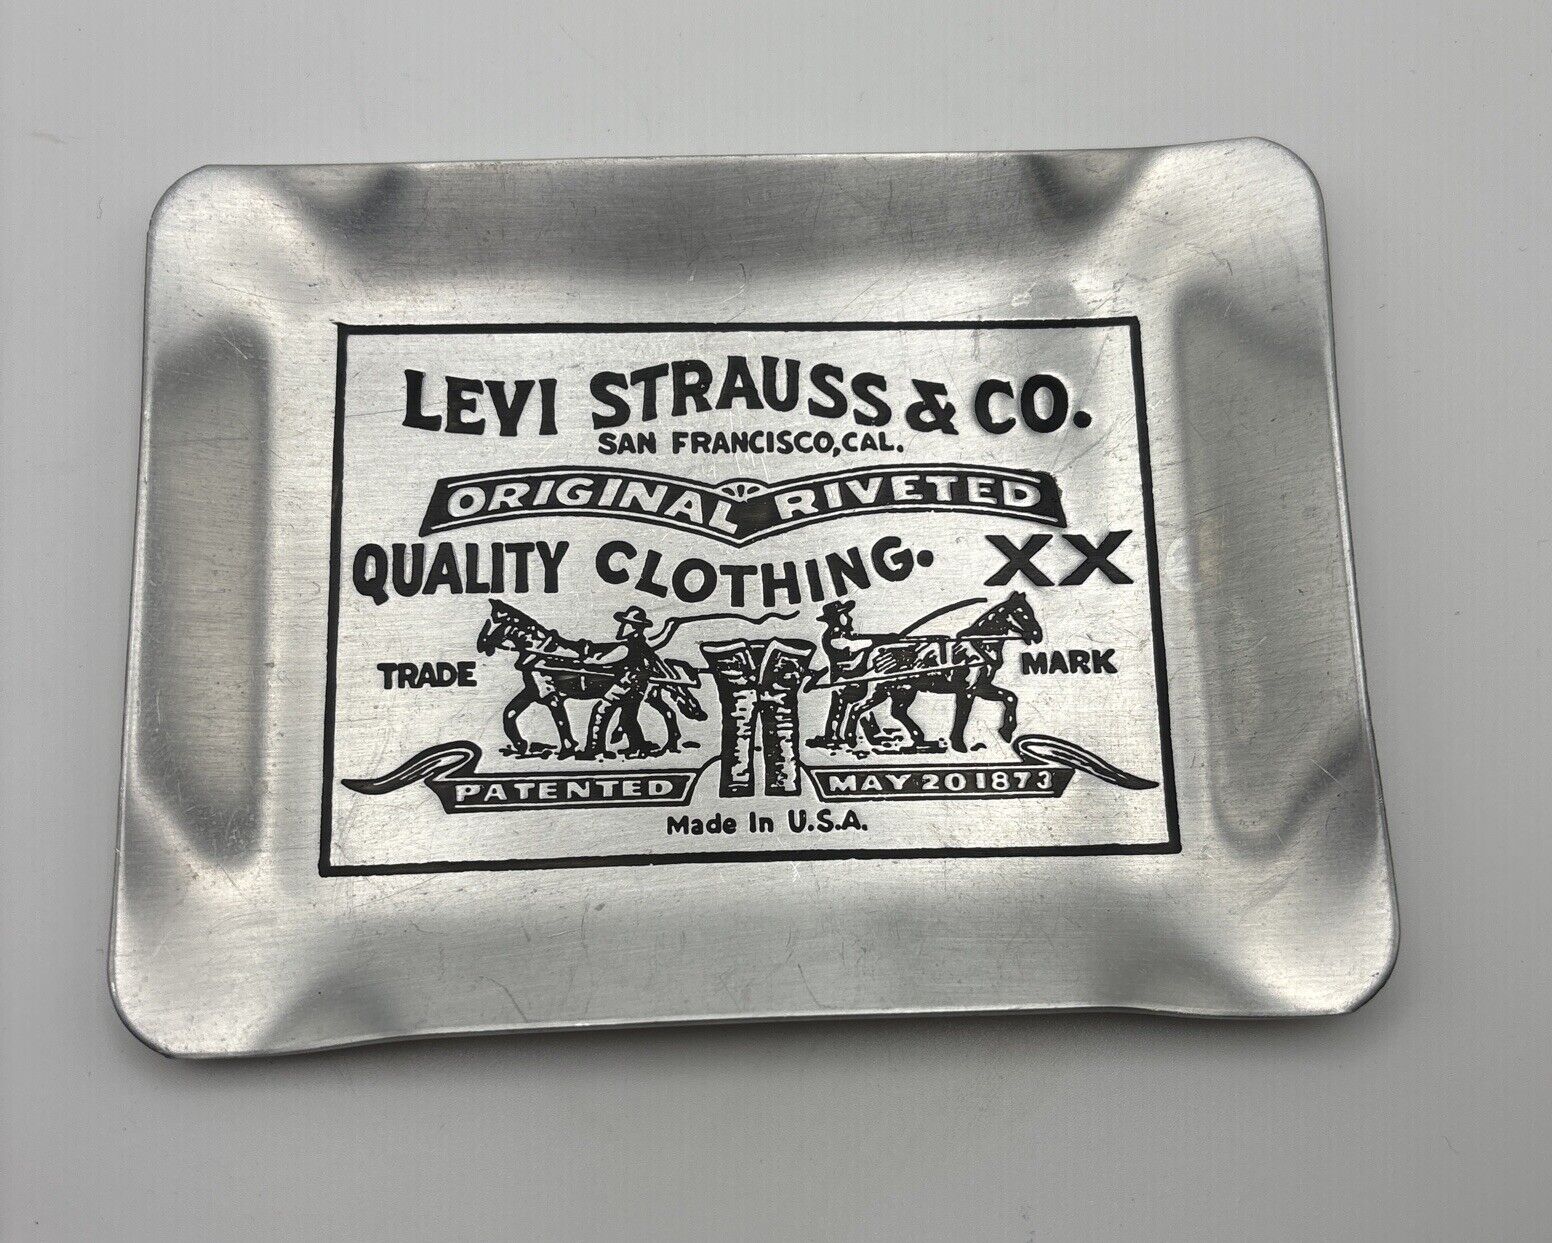 VINTAGE 1970s LEVI STRAUSS (LEVIS JEANS) METAL TIP TRAY / ROLLING TRAY / ASHTRAY